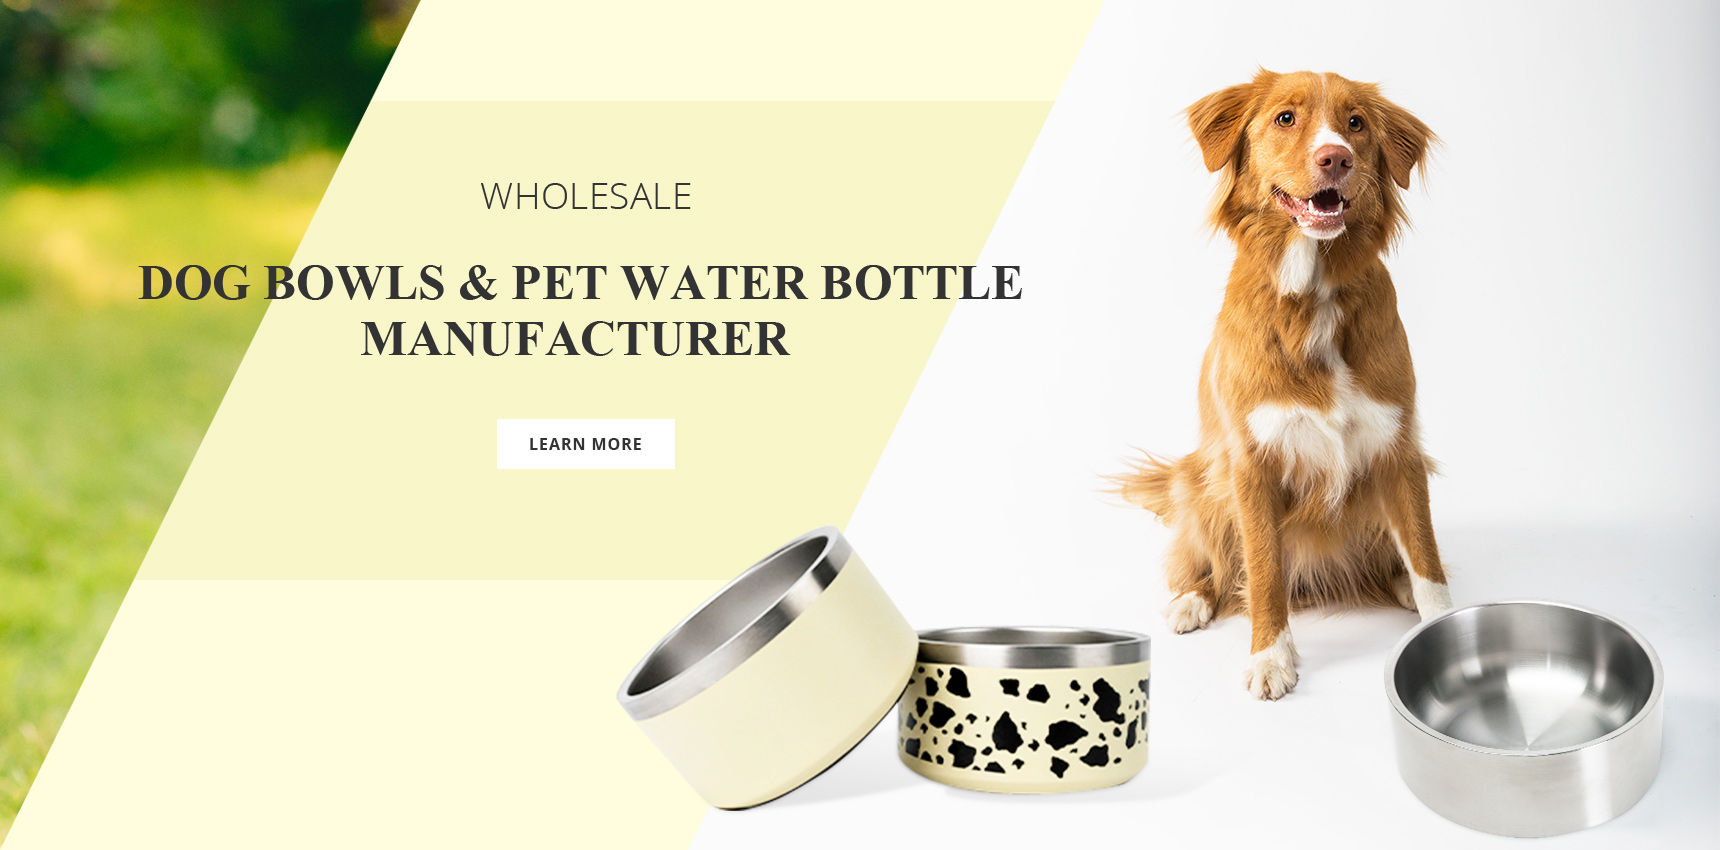 Stainless Steel Food and Water Dog Bowl